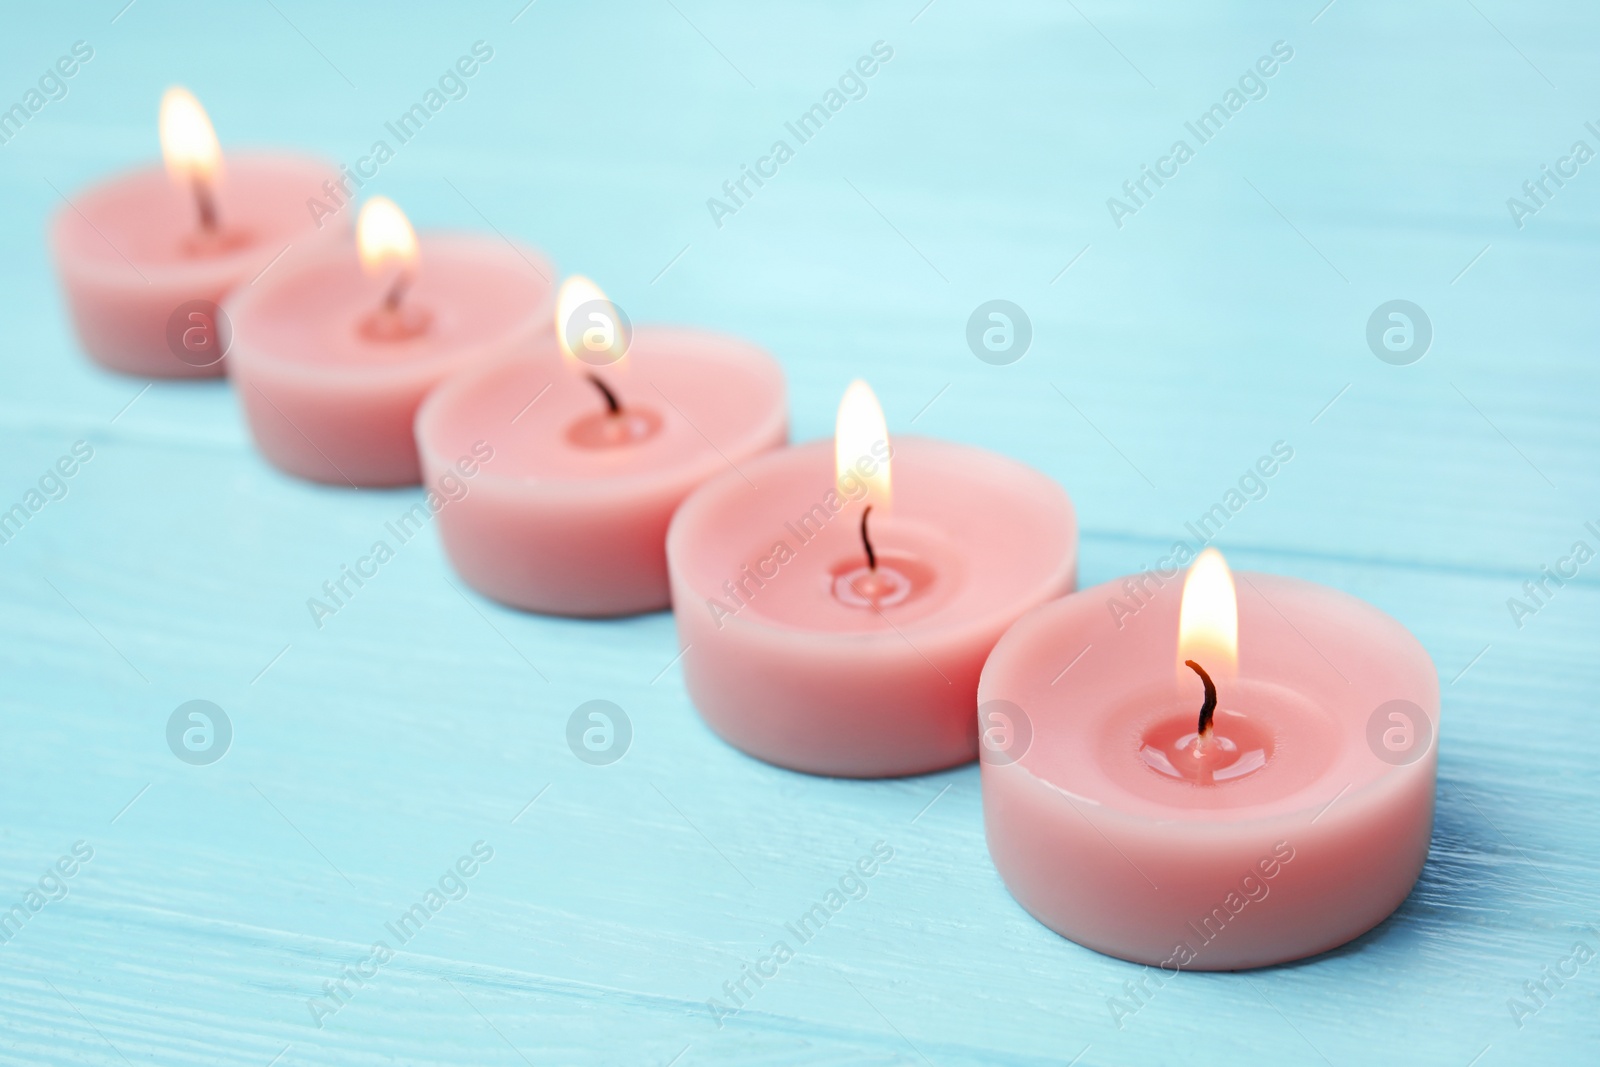 Photo of Burning decorative candles on light blue wooden table